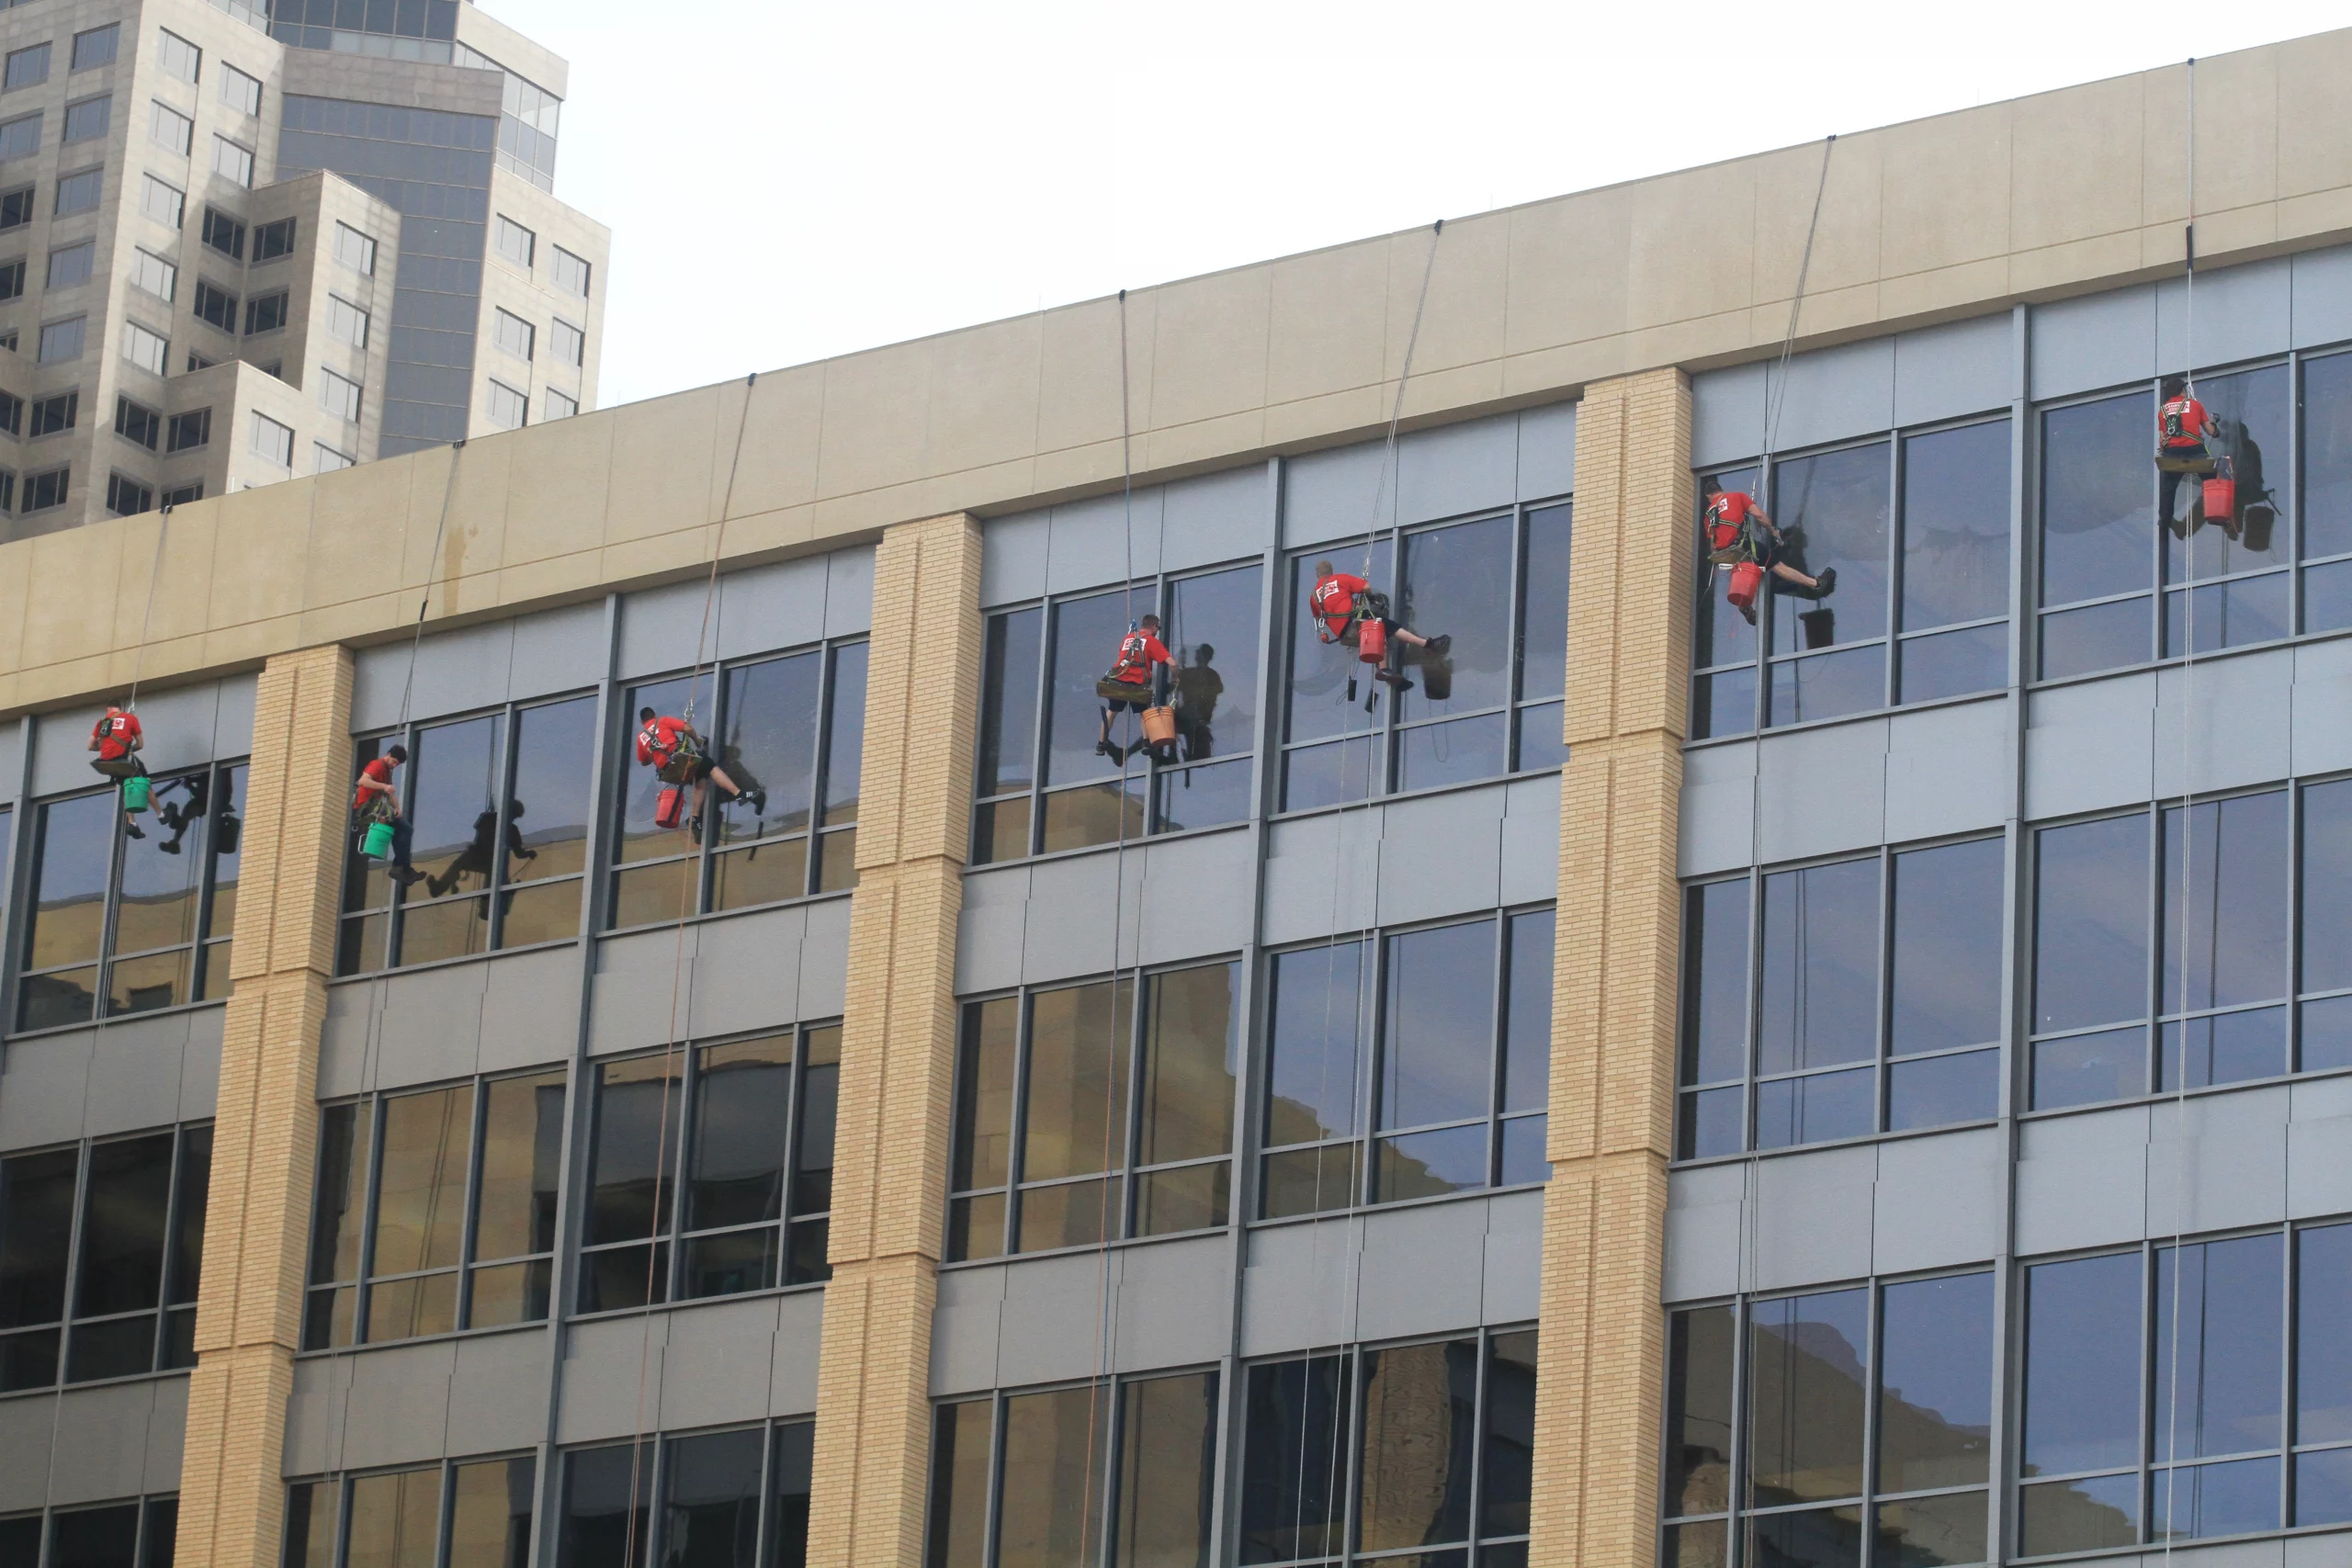 High rise window cleaners cleaning windows in Des Moines, Iowa